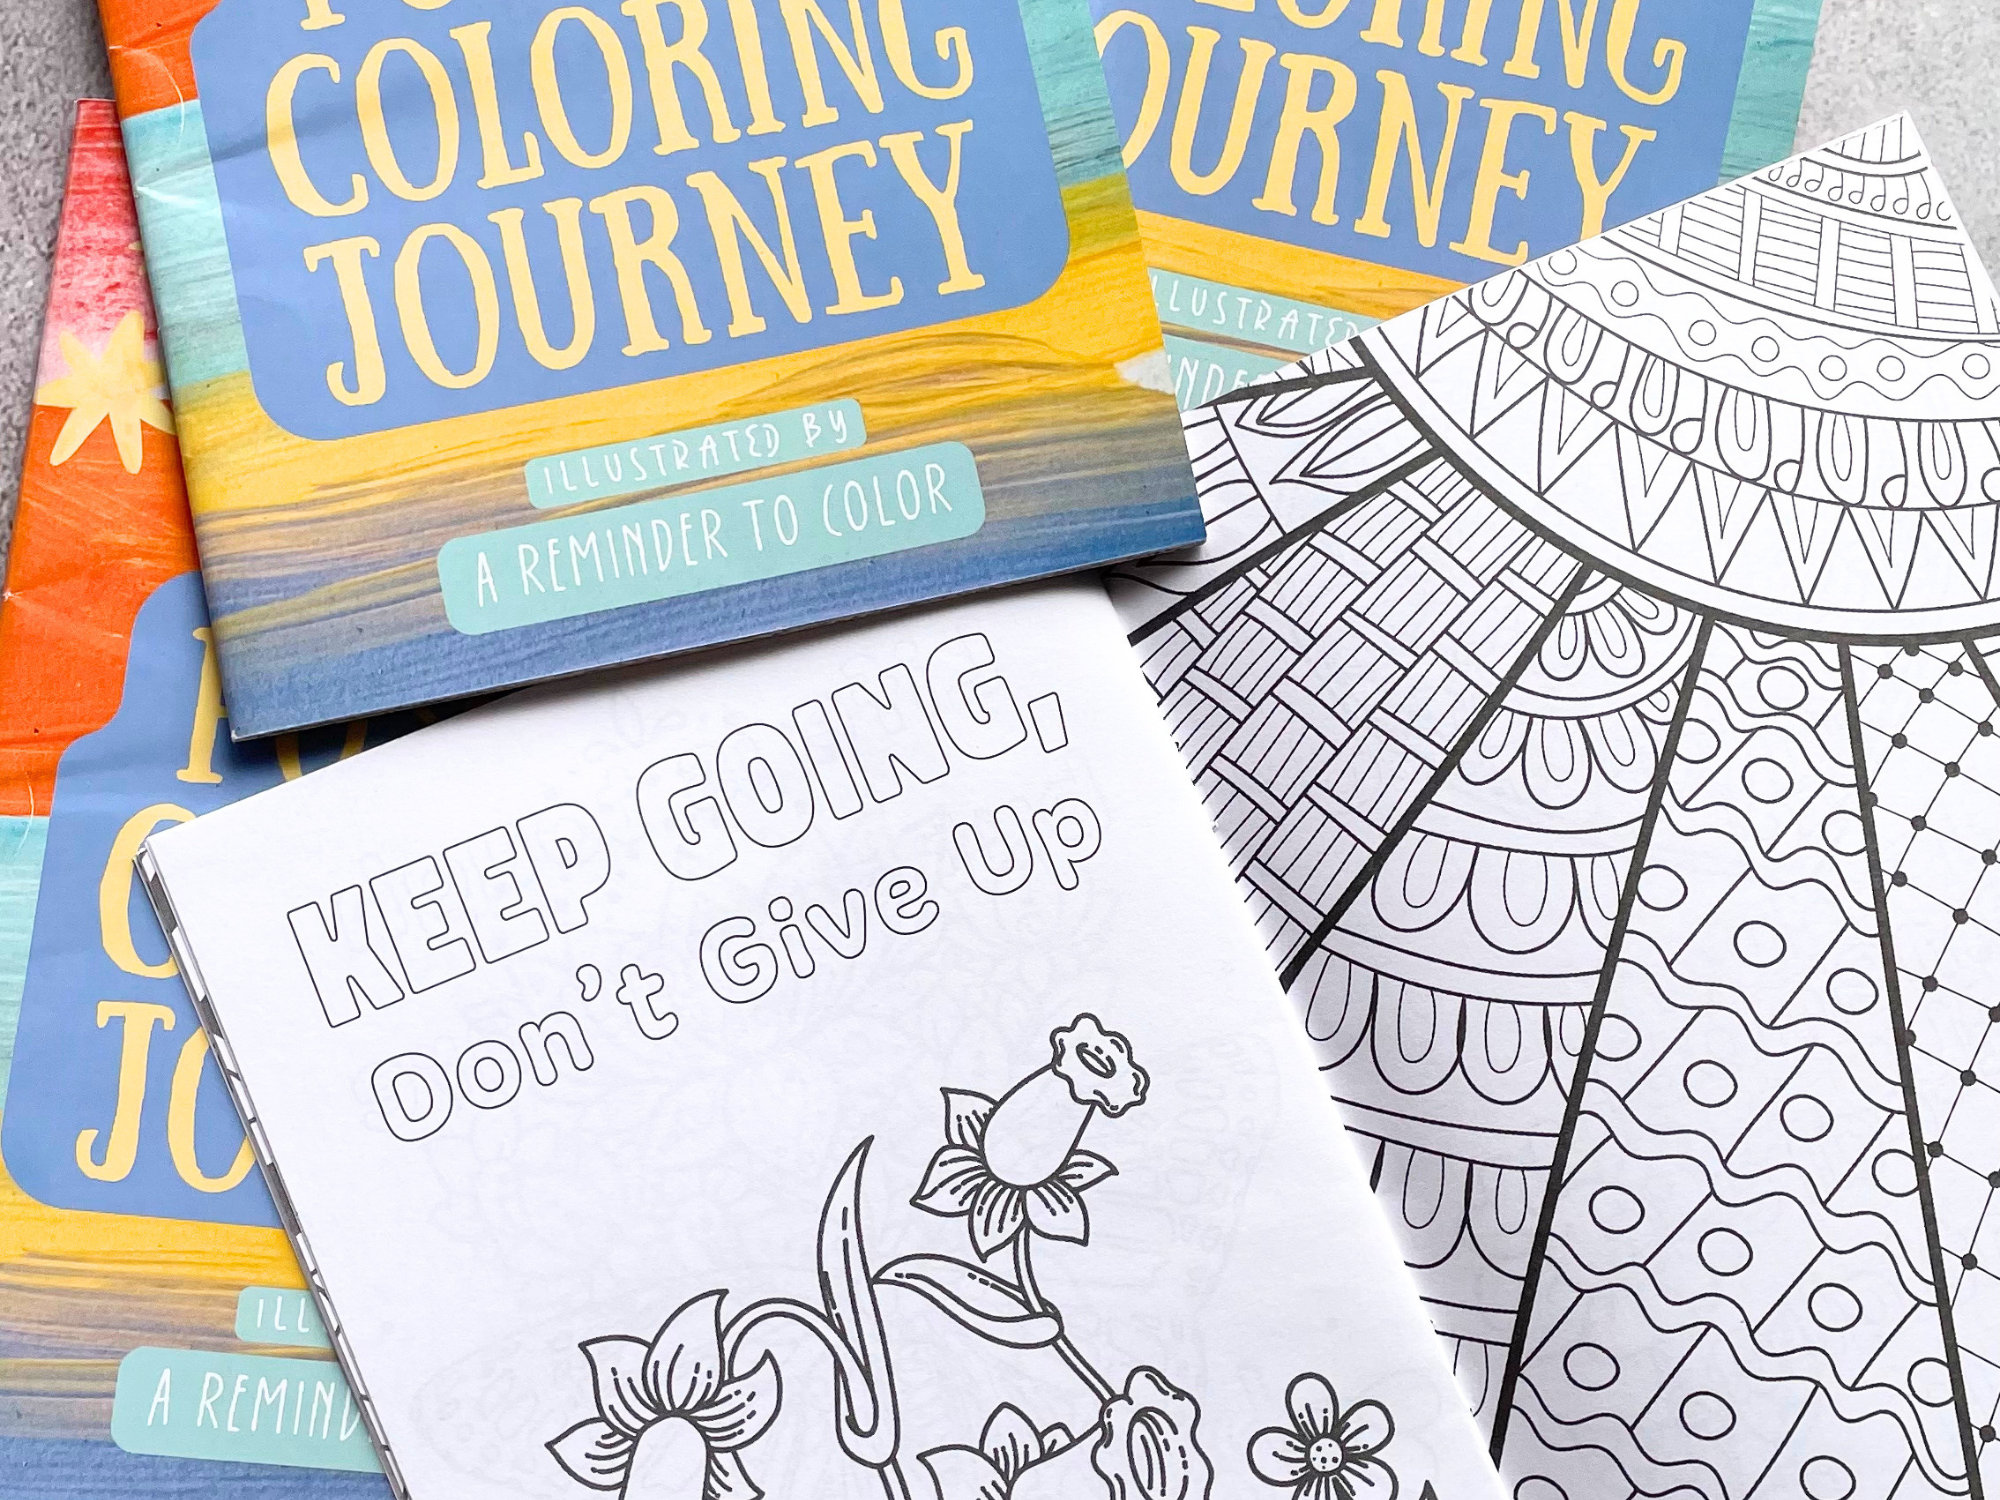  ZOCO - Gift Pack: 3 Adult Coloring Books Set with Colored  Pencils - Oceans, Patterns, and Nature Coloring Books - Includes 10  Pre-sharpened Coloring Pencils : Everything Else